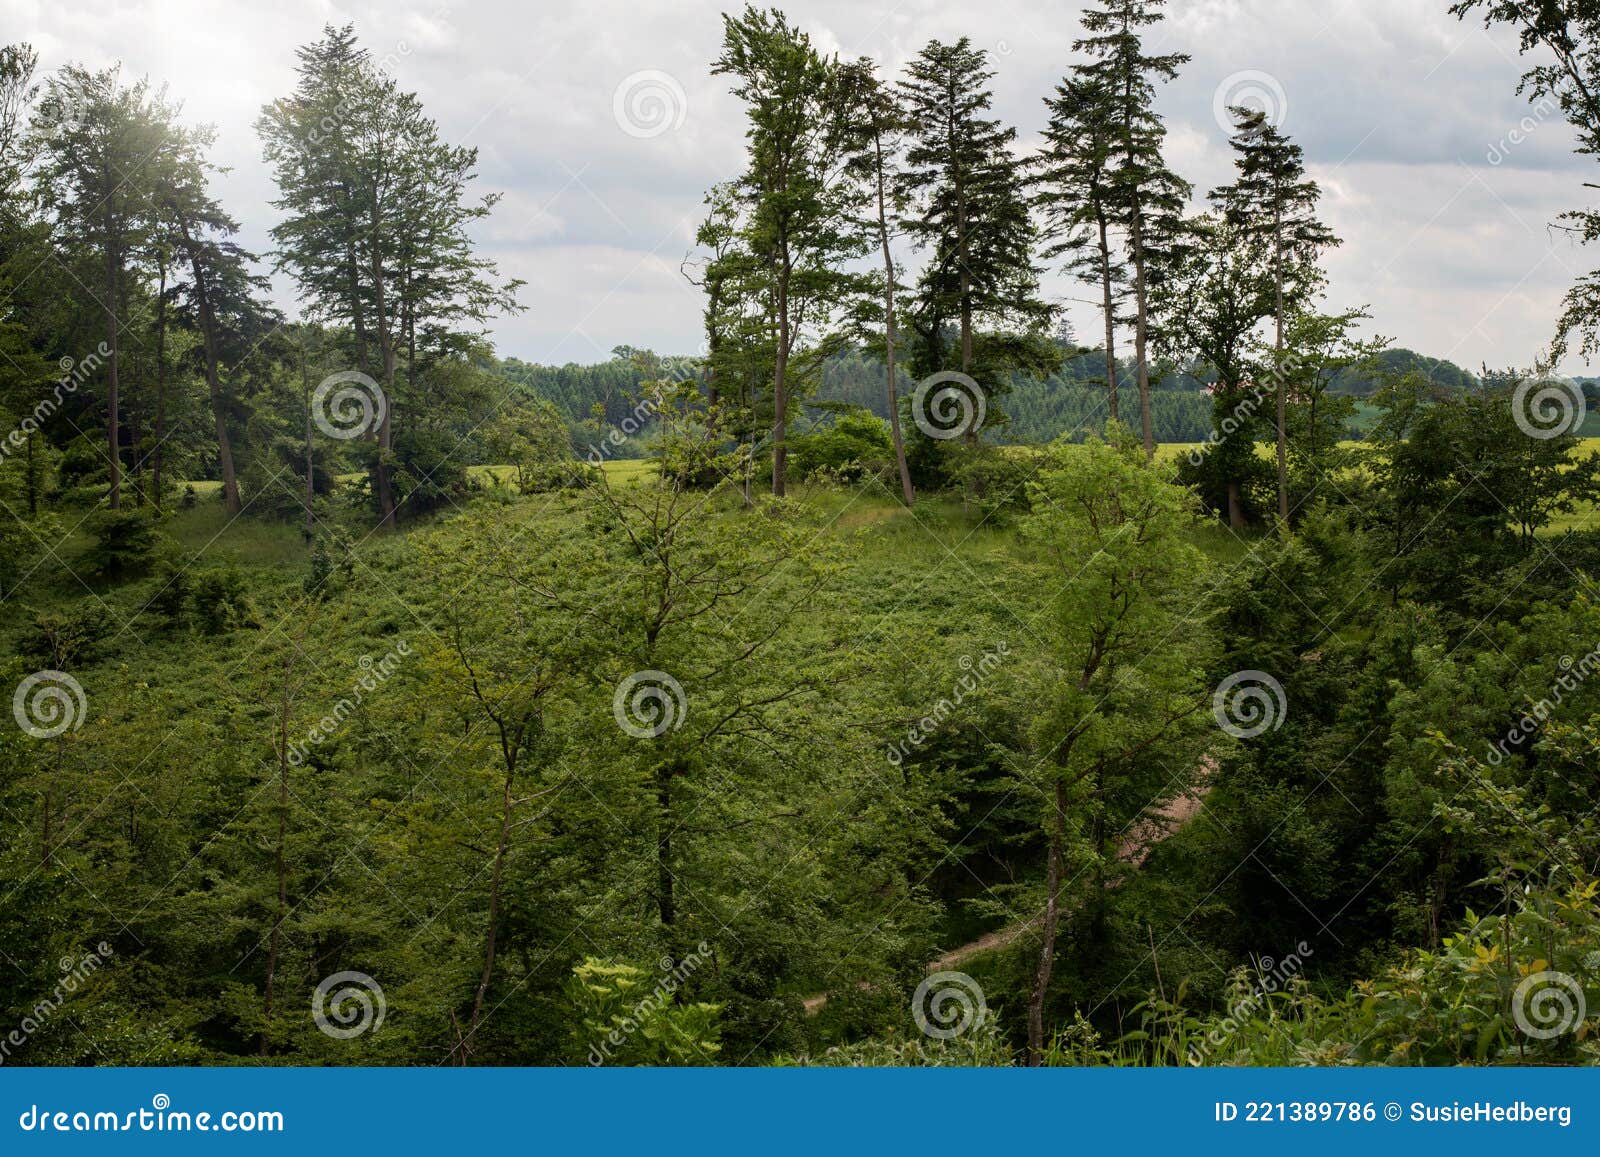 Footpath through Valley and Lush Green Nature Reserve in Denmark on a Day Stock Photo - Image of europe, scene: 221389786